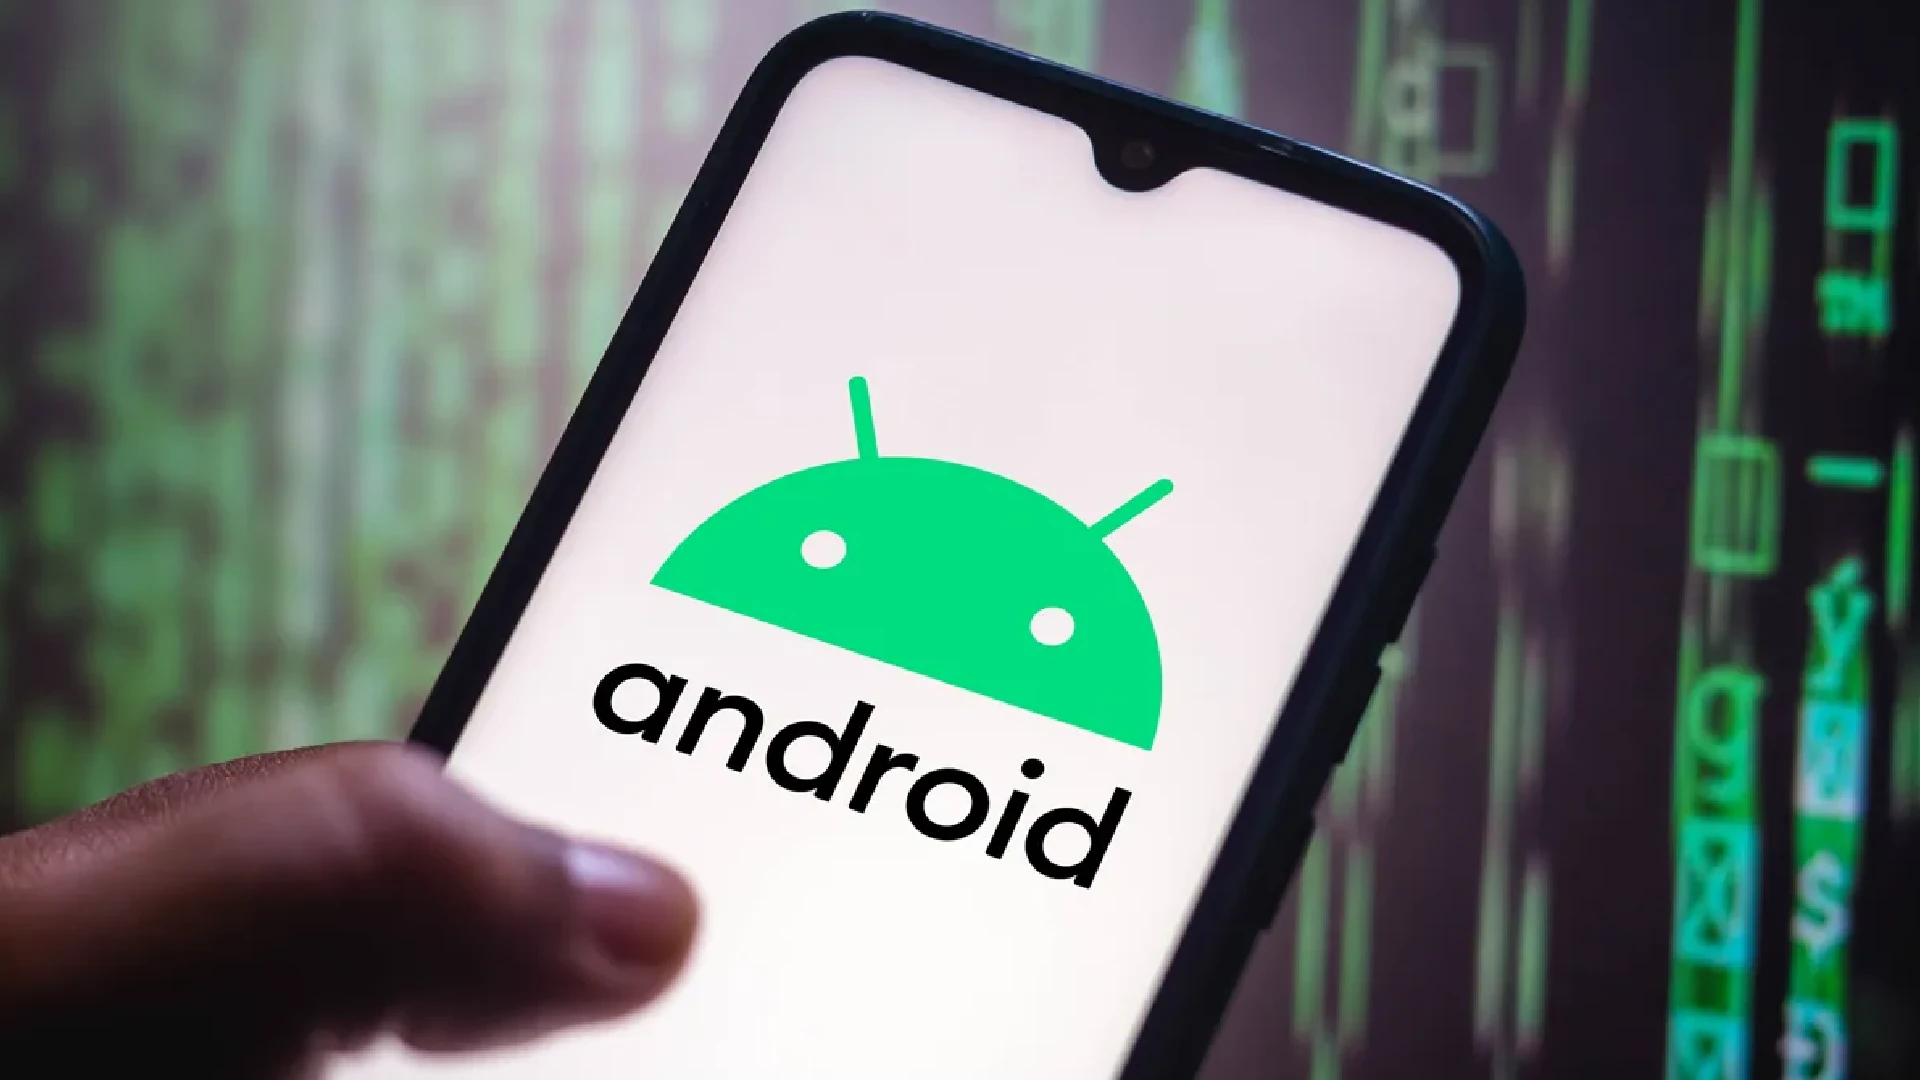 Millions Of Android Smartphones Running On Mali GPU Are Vulnerable To Attacks, And You Can’t Fix It